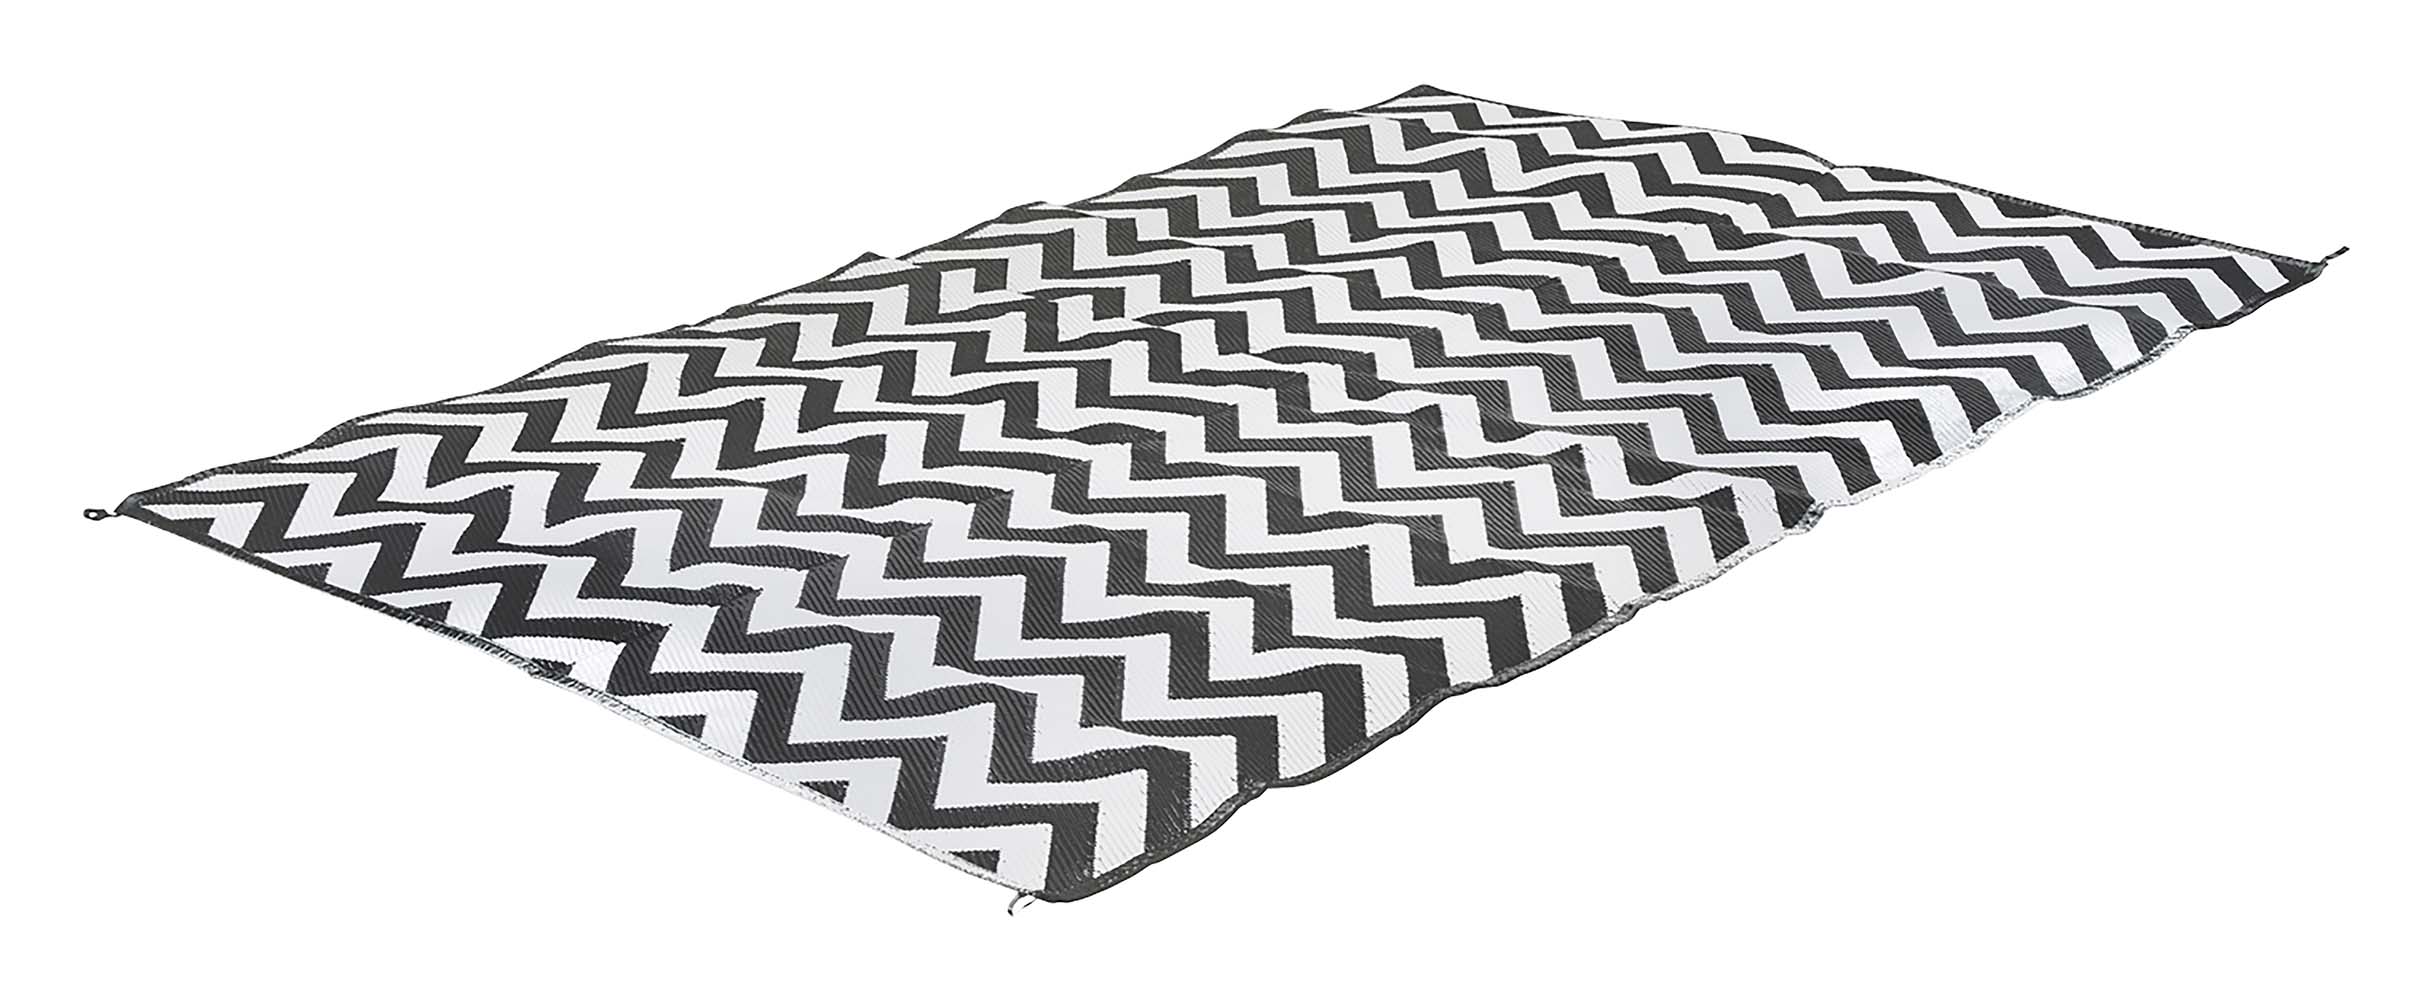 4271026 Bo-Camp - Urban Outdoor collection - Chill mat - Wave - Polypropylene - Black/White - L